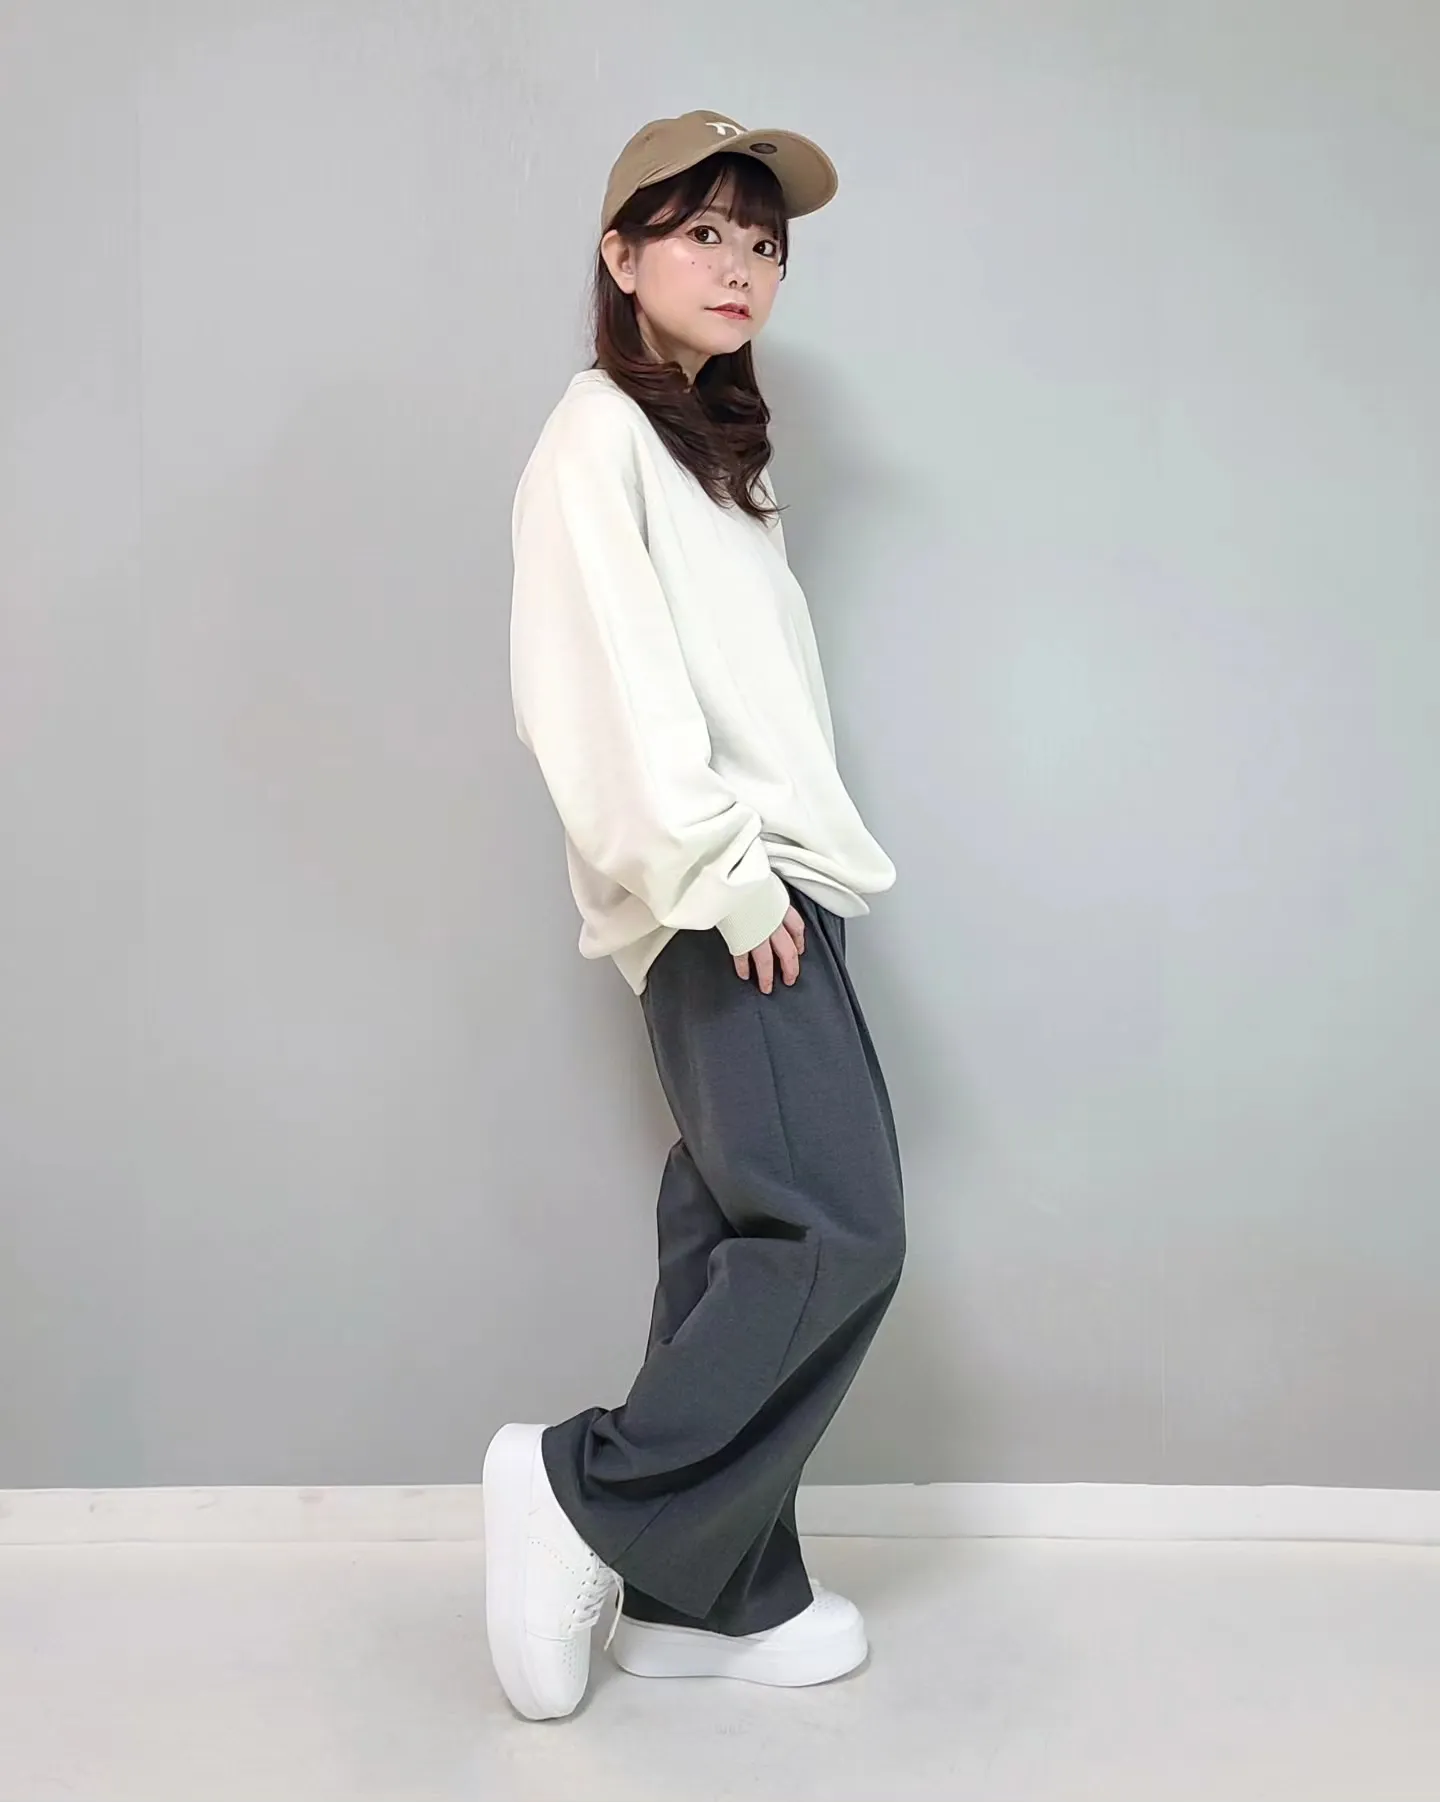 GU's tuck wide pants are too god! ⭐ pants refugee must-see! There 